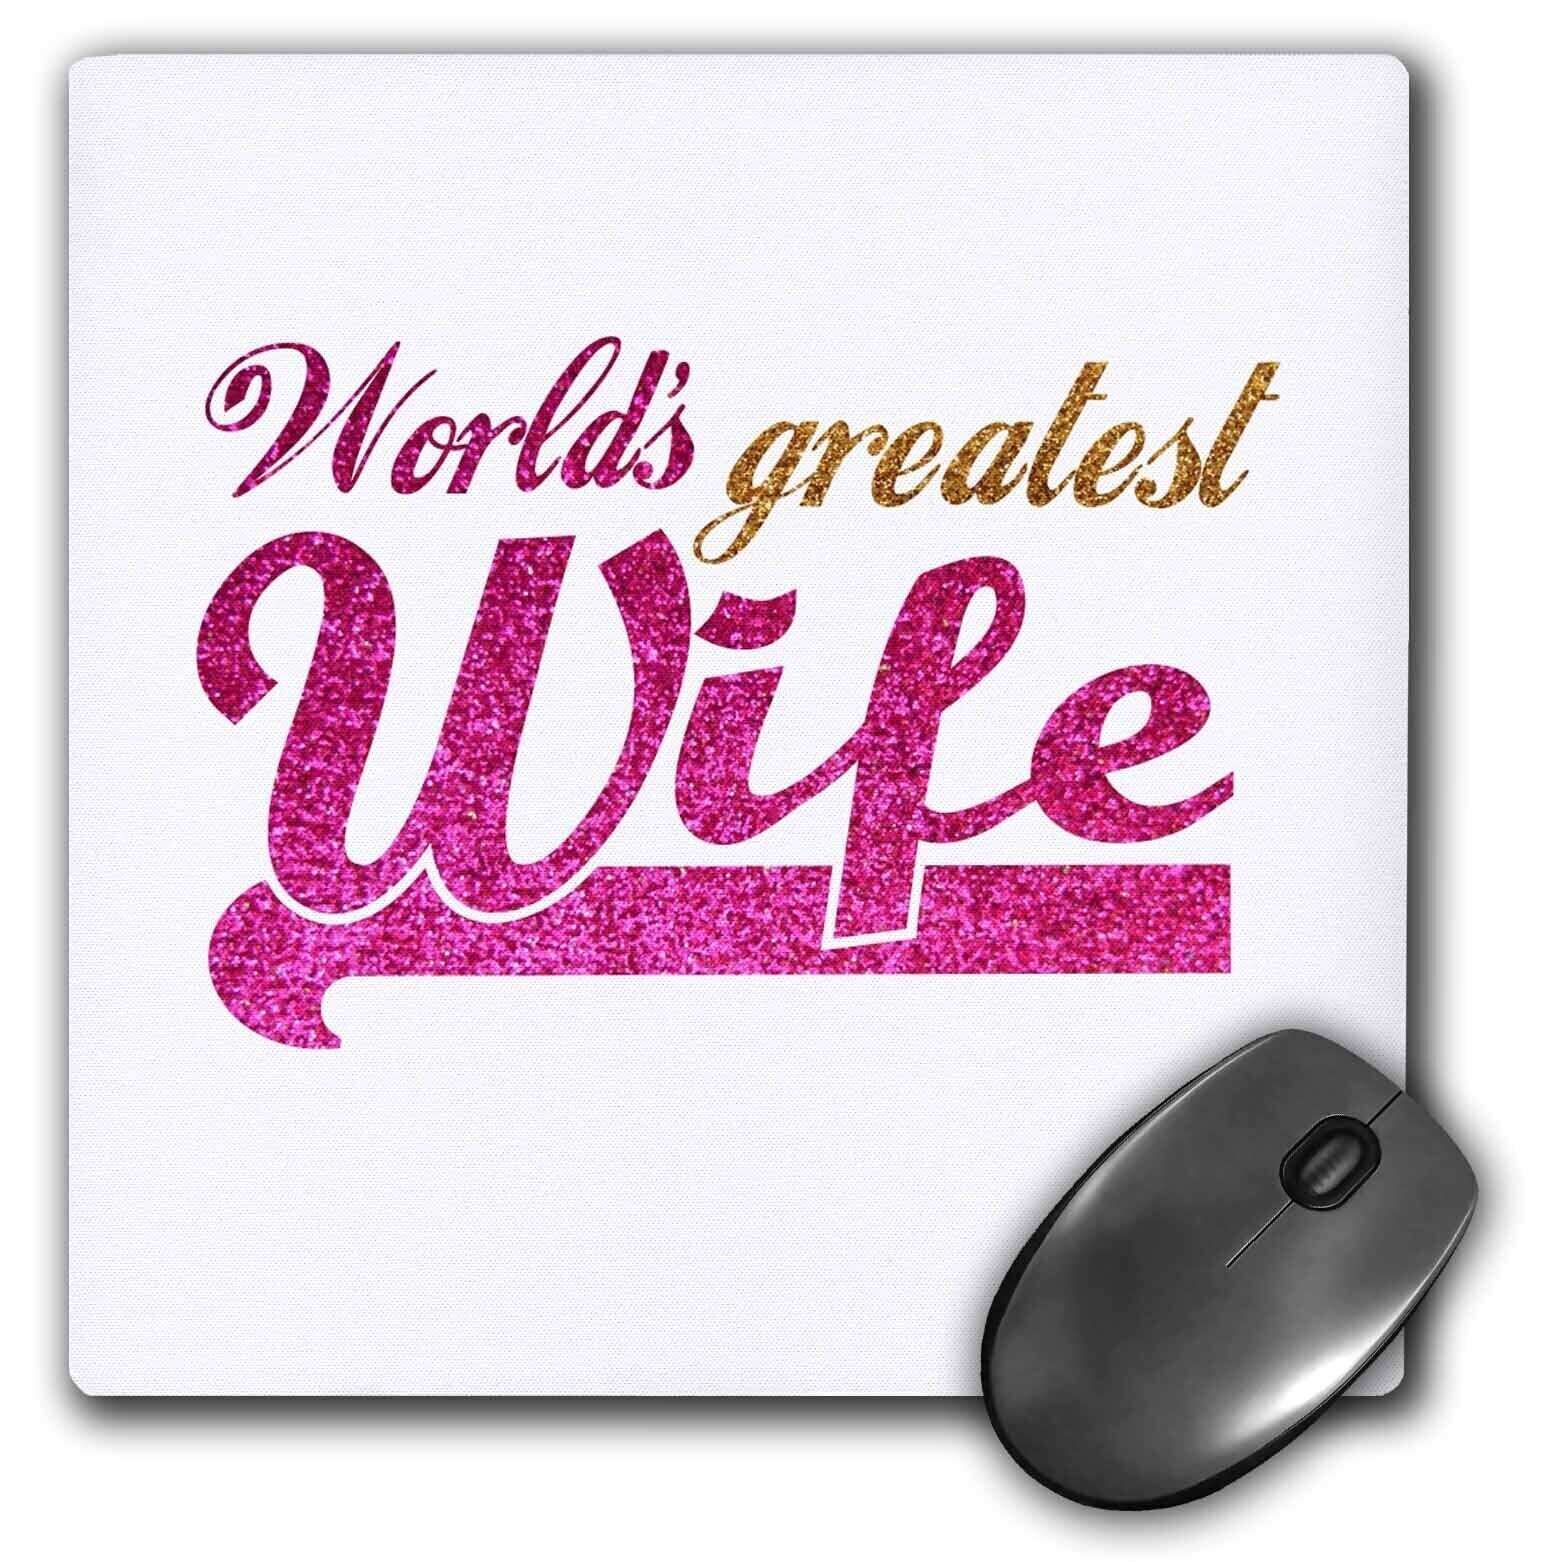 3dRose Worlds Greatest Wife - Romantic marriage or wedding anniversary gifts for